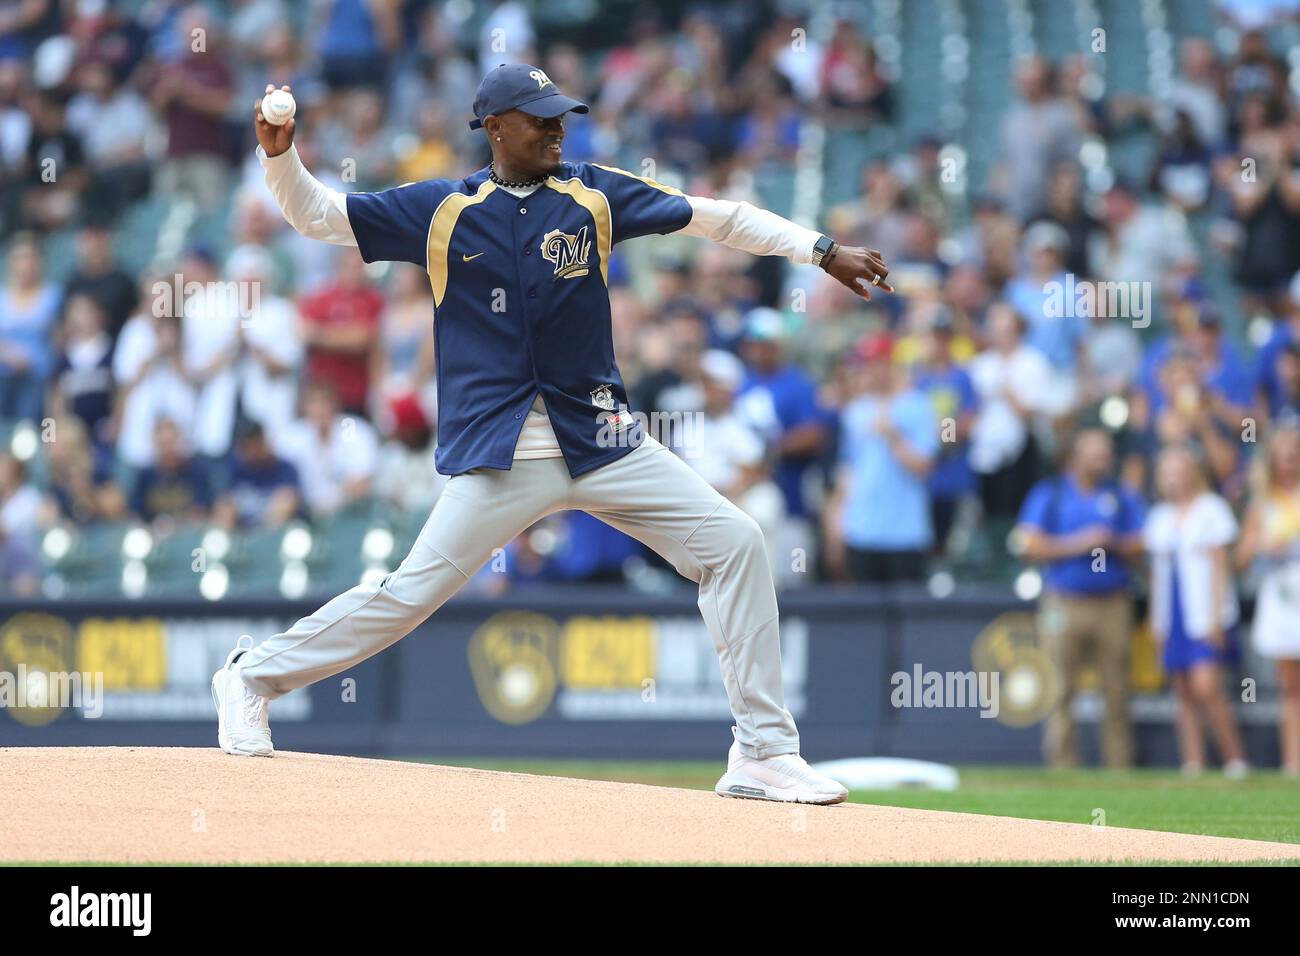 MILWAUKEE, WI - JULY 23: United States Hall of Fame triple jumper Kenny  Harrison throws out the first pitch during a game between the Milwaukee  Brewers and the Chicago White Sox on